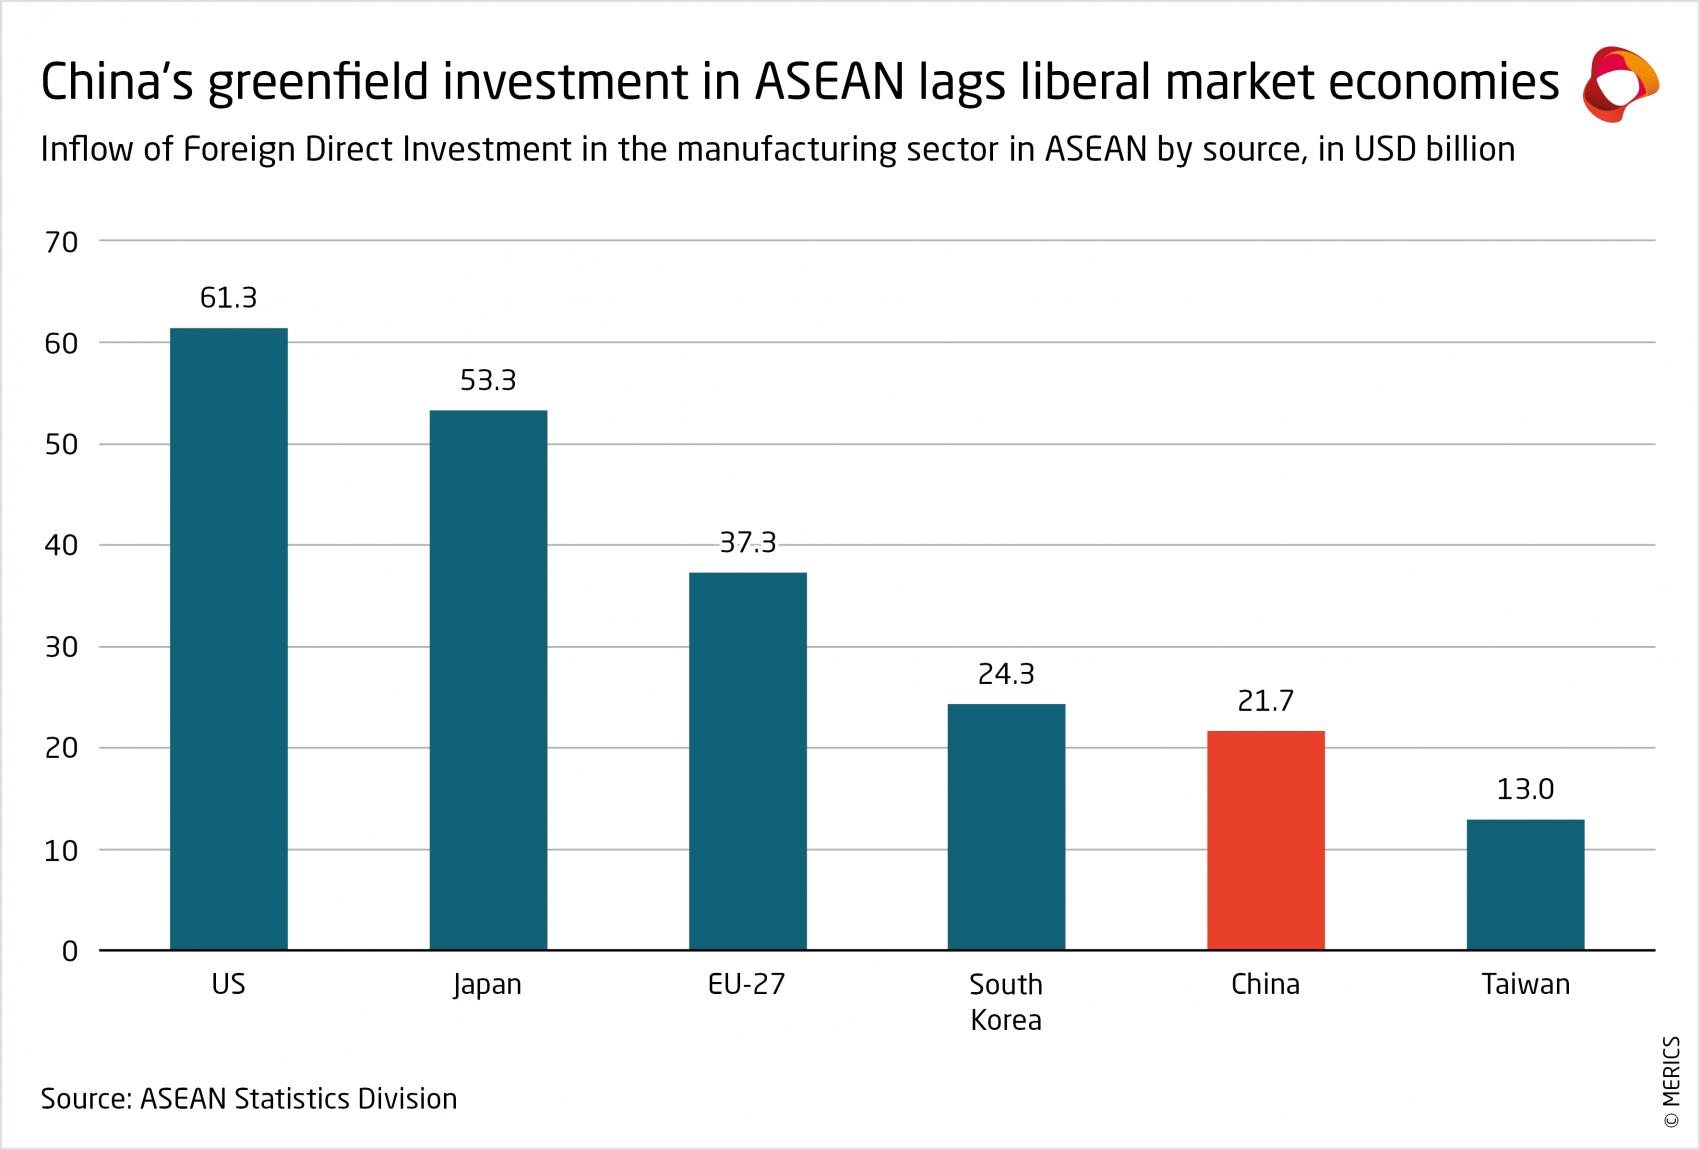 merics-report-the-party-knows-best-chinas-greenfield-investment-in-asean-lags-liberal-market-economies-exhibit-18.png